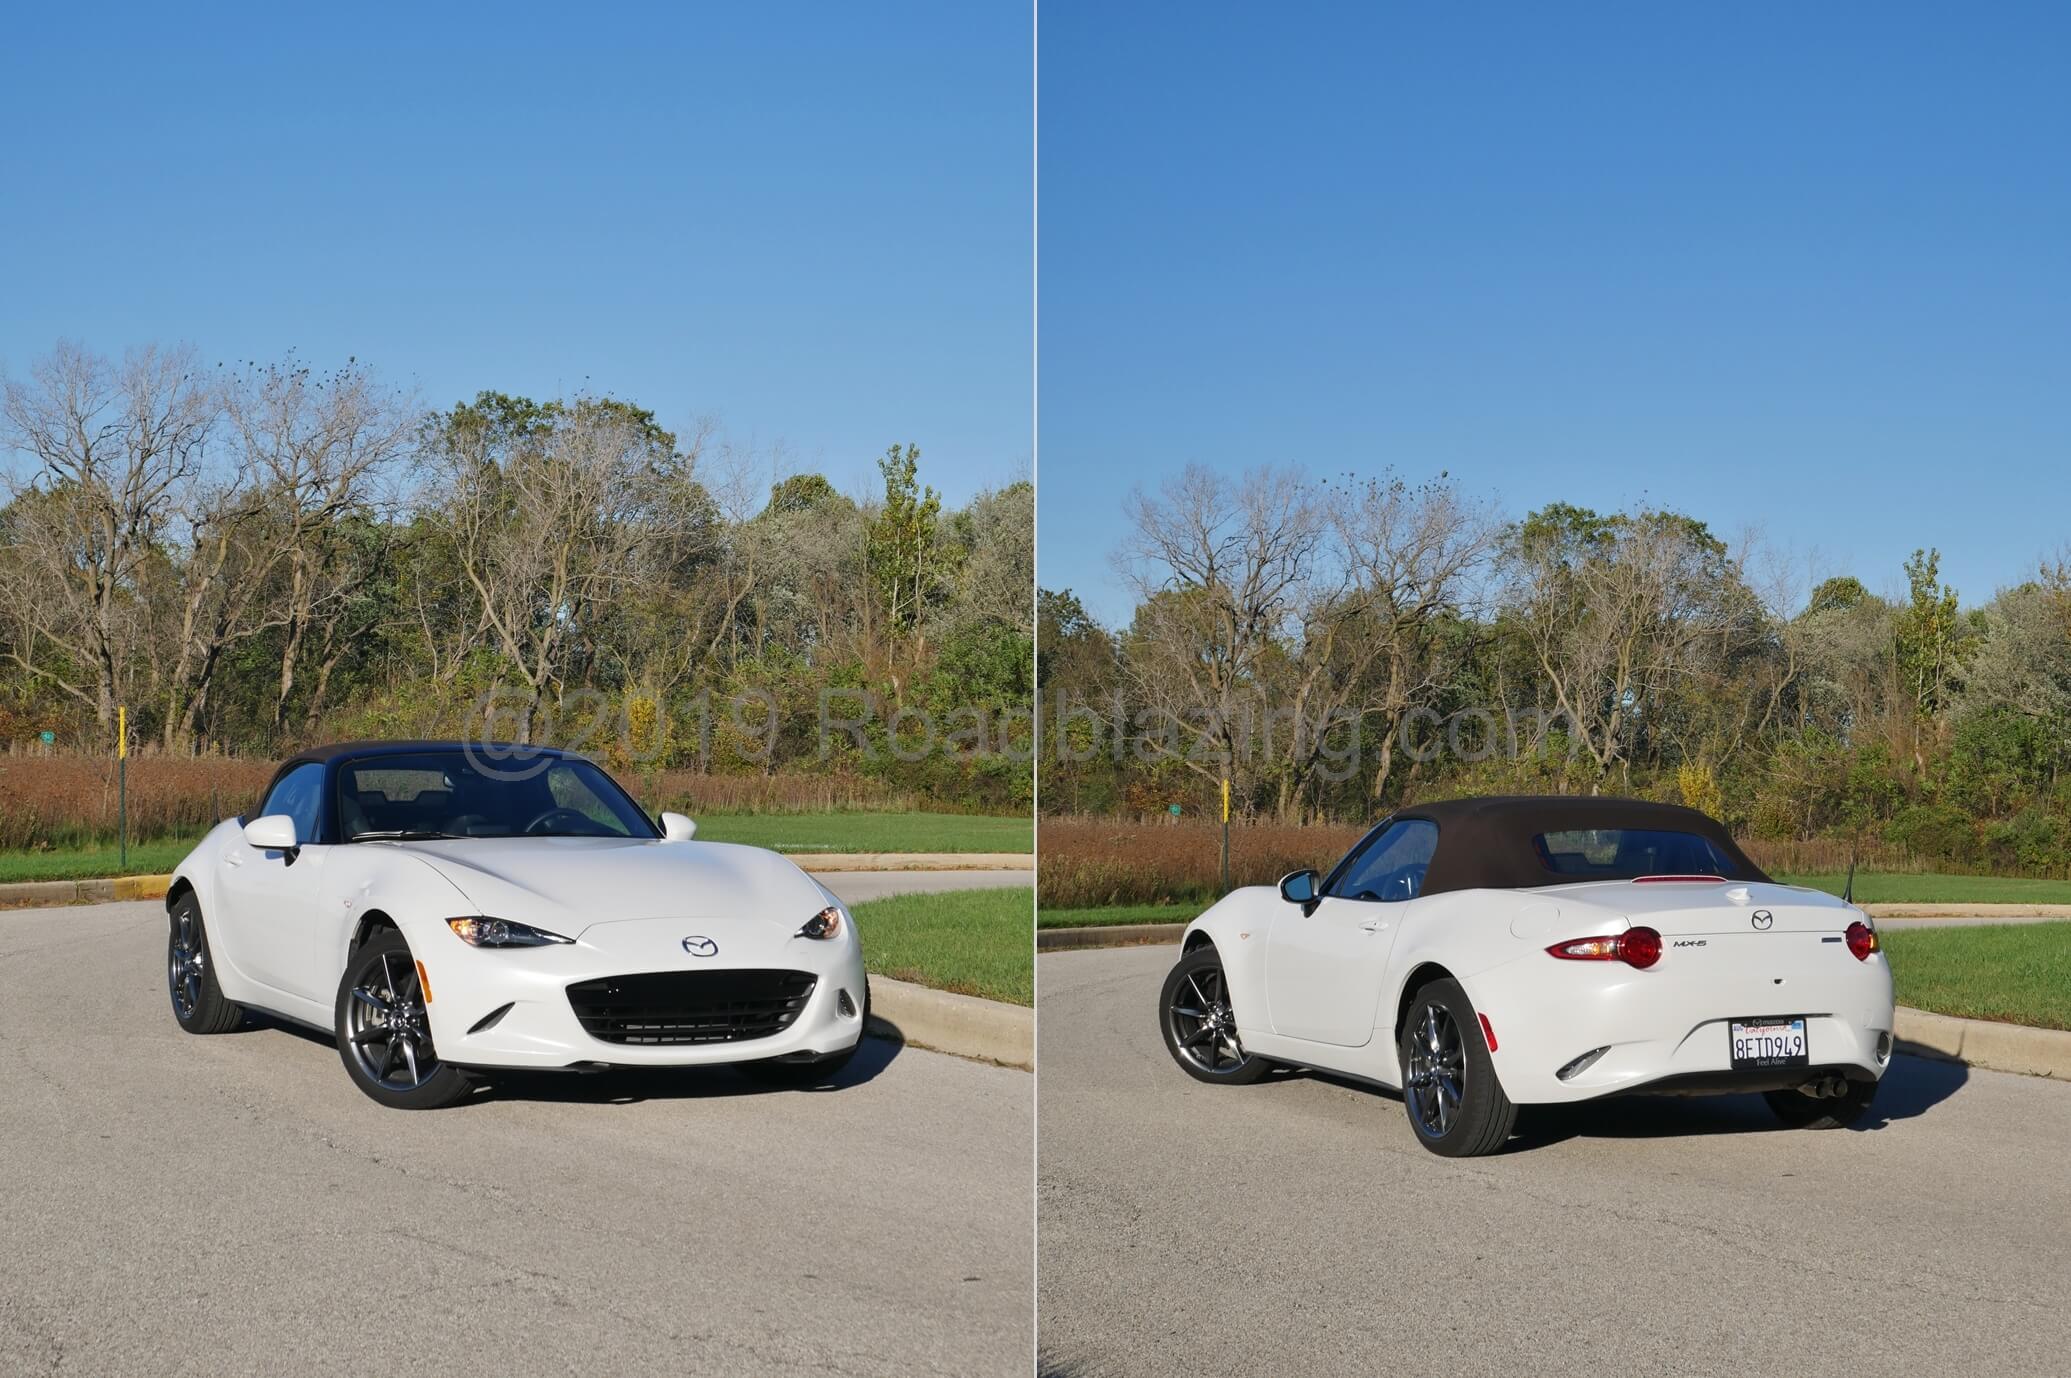 2019 Mazda MX-5 Grand Touring: Cloth top, with extra padding layer, is an easy one handed grab and lock affair.